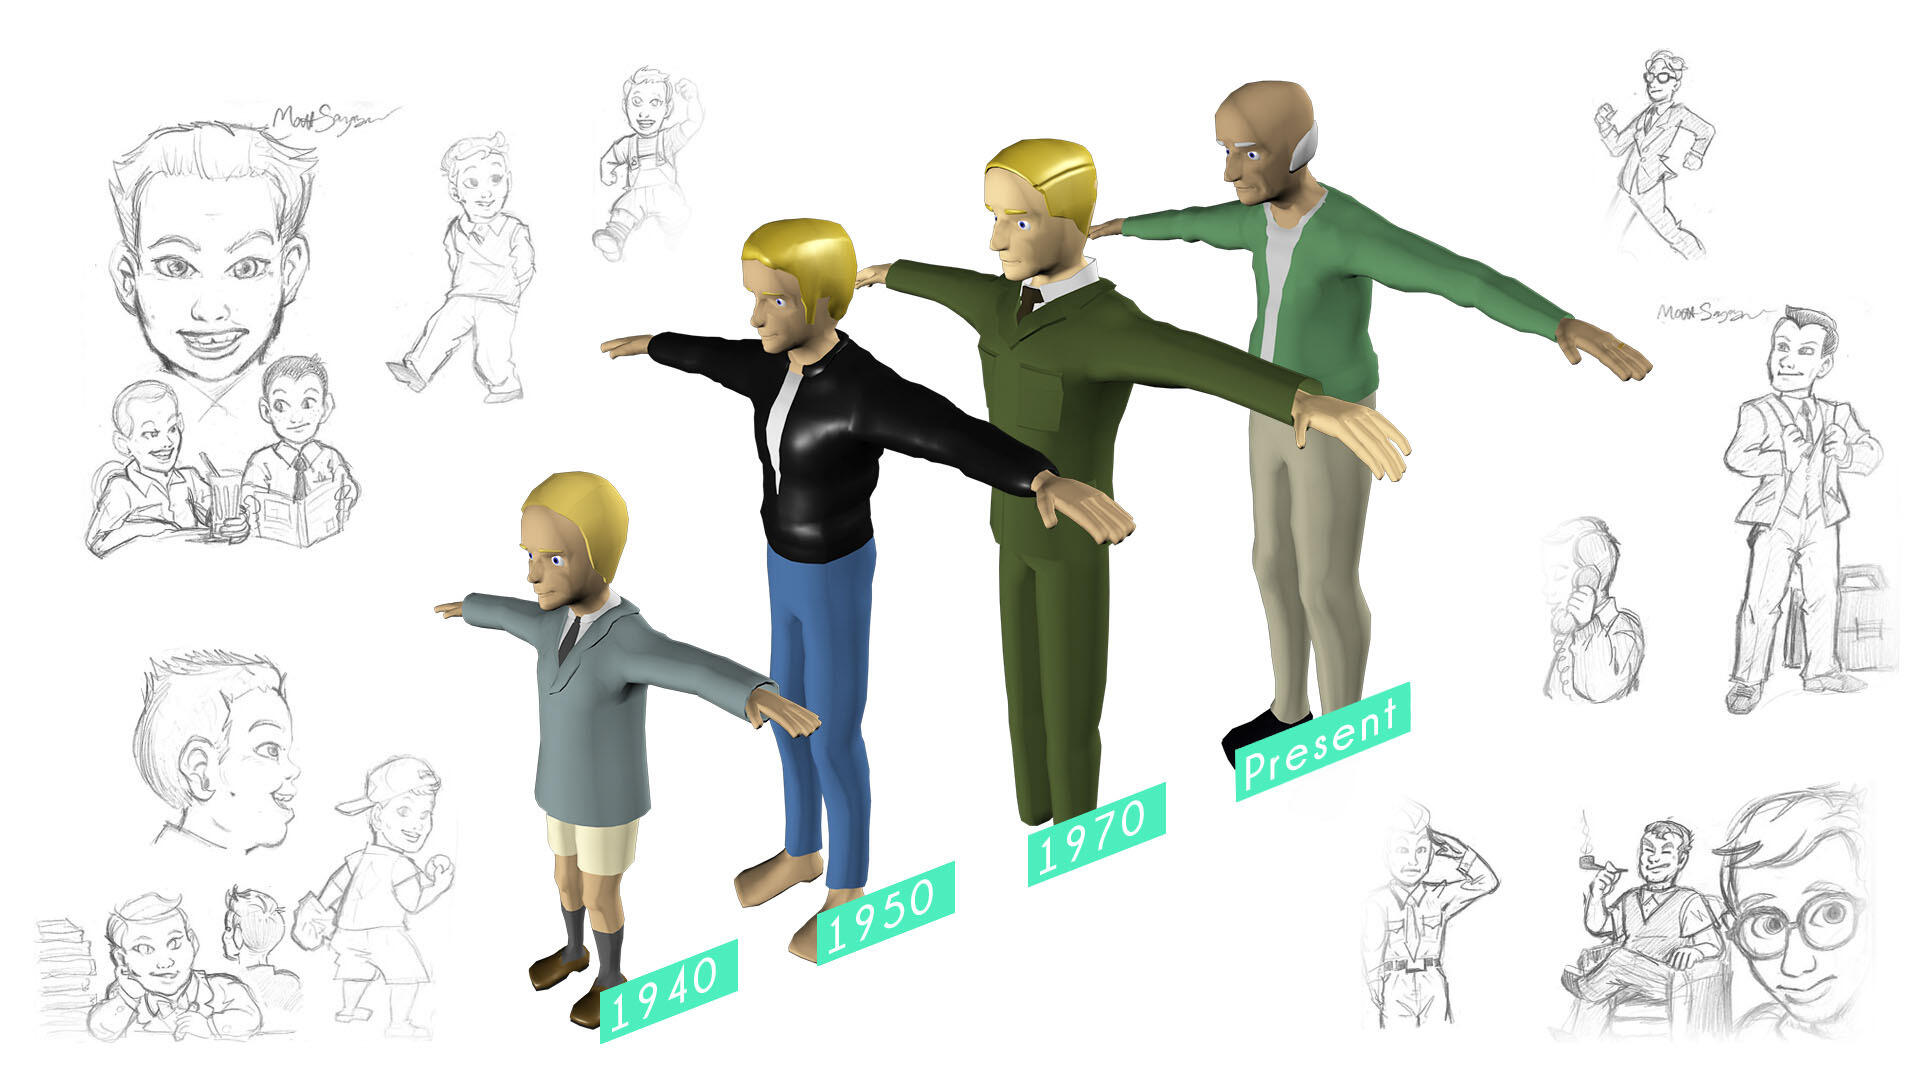 The VoicingElder program uses avatars from four different development stages: childhood, teenage, young adulthood and older adulthood.